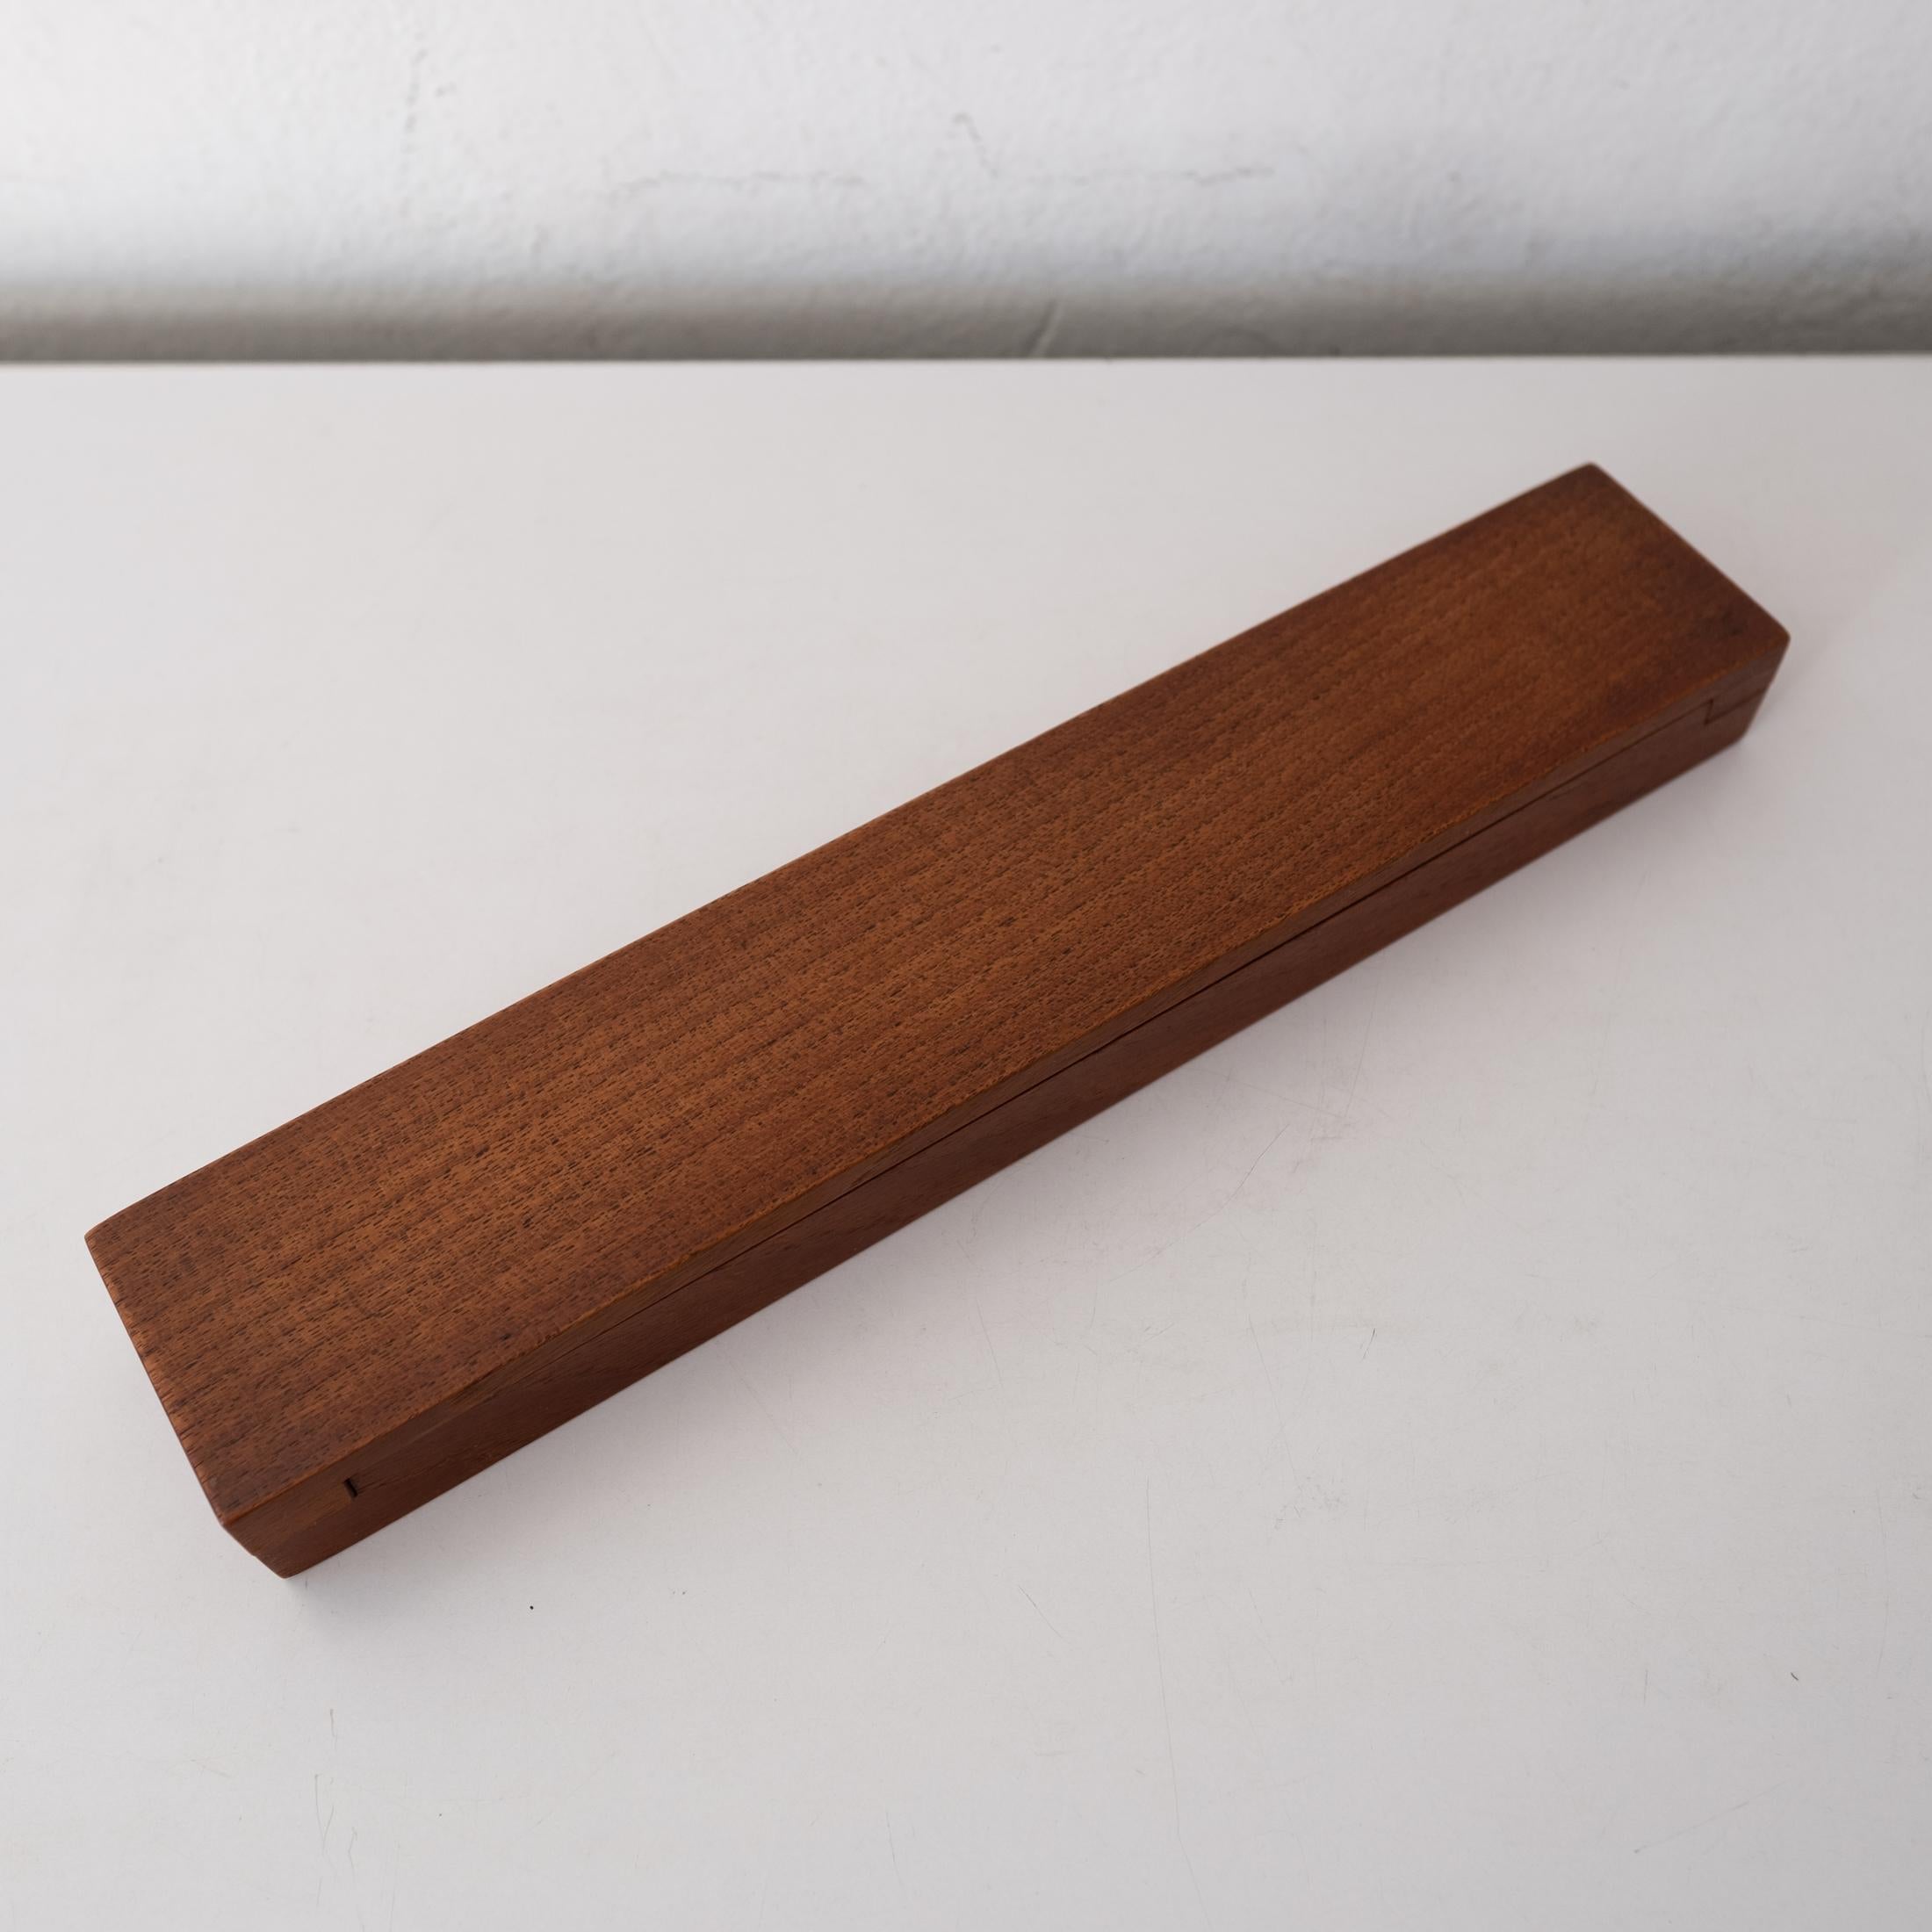 A hard to find early Dansk teak box designed by Jens Quistgaard. It has removeable dividers. Could be used for jewelry, watches, earrings or ?? Stamped on the bottom. Made in Denmark, 1960s.